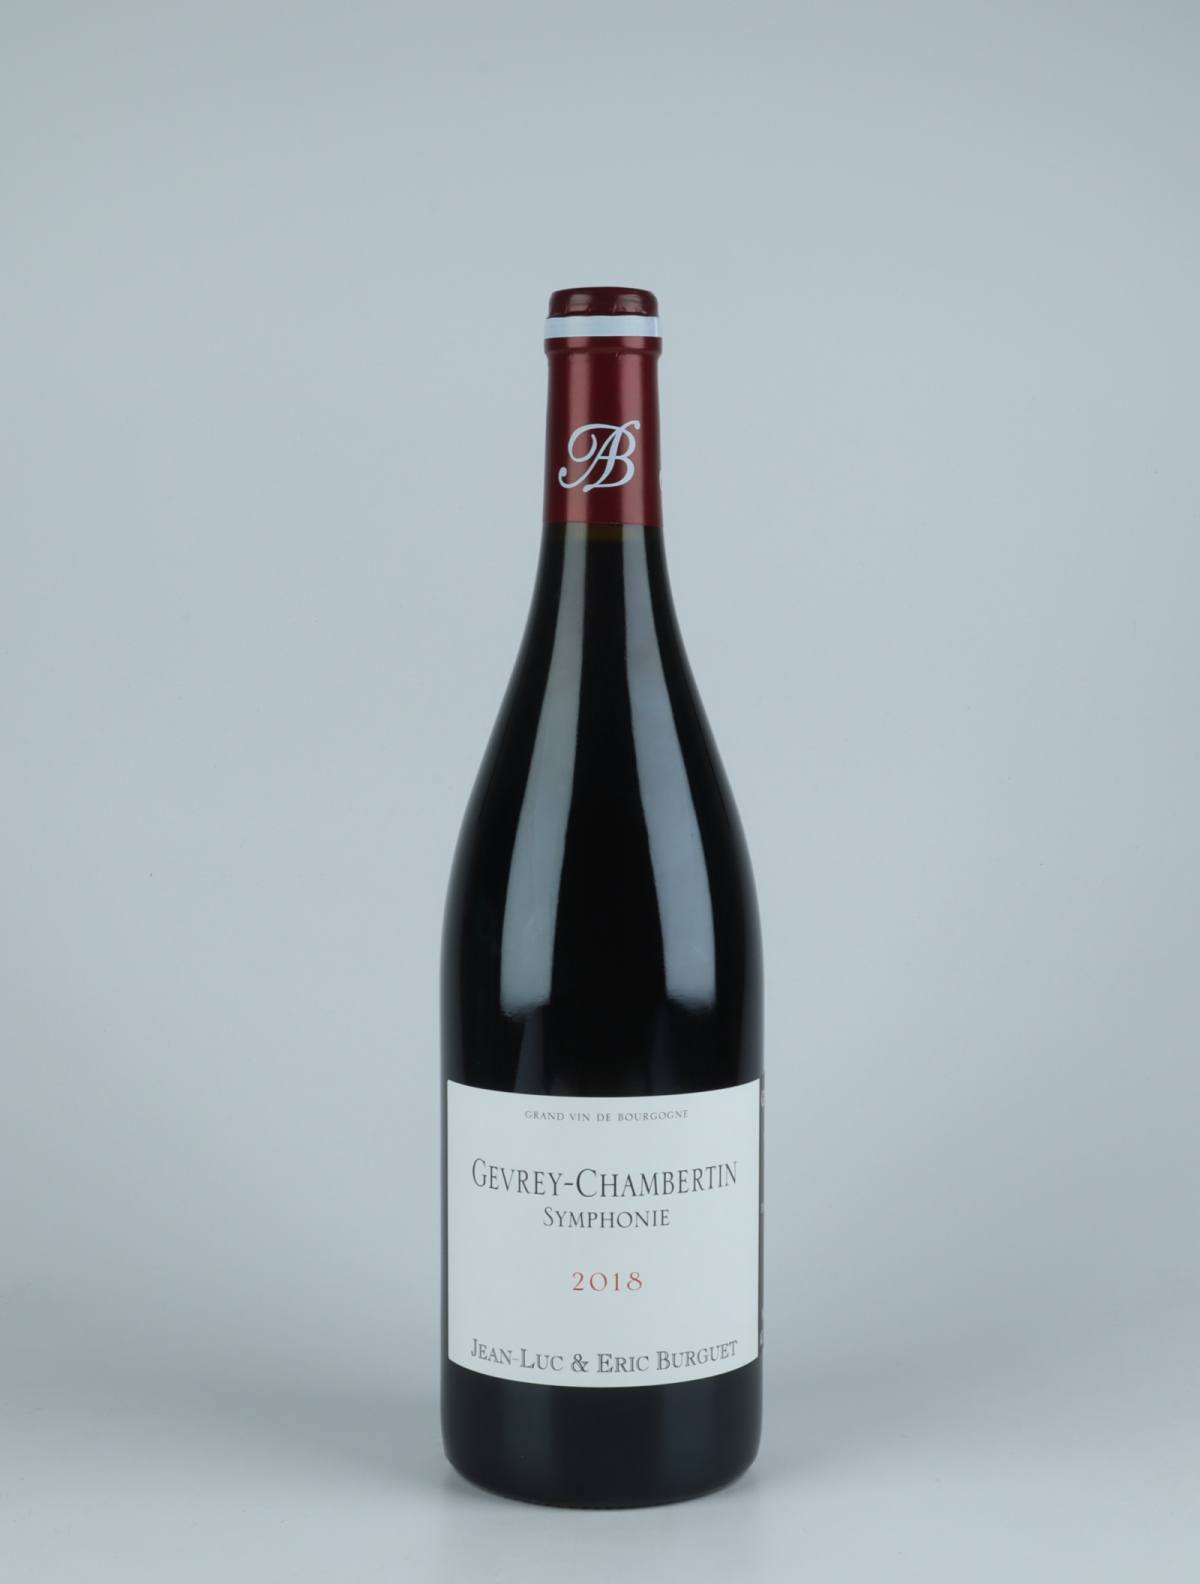 A bottle 2018 Gevrey-Chambertin - Symphonie Red wine from Jean-Luc & Eric Burguet, Burgundy in France